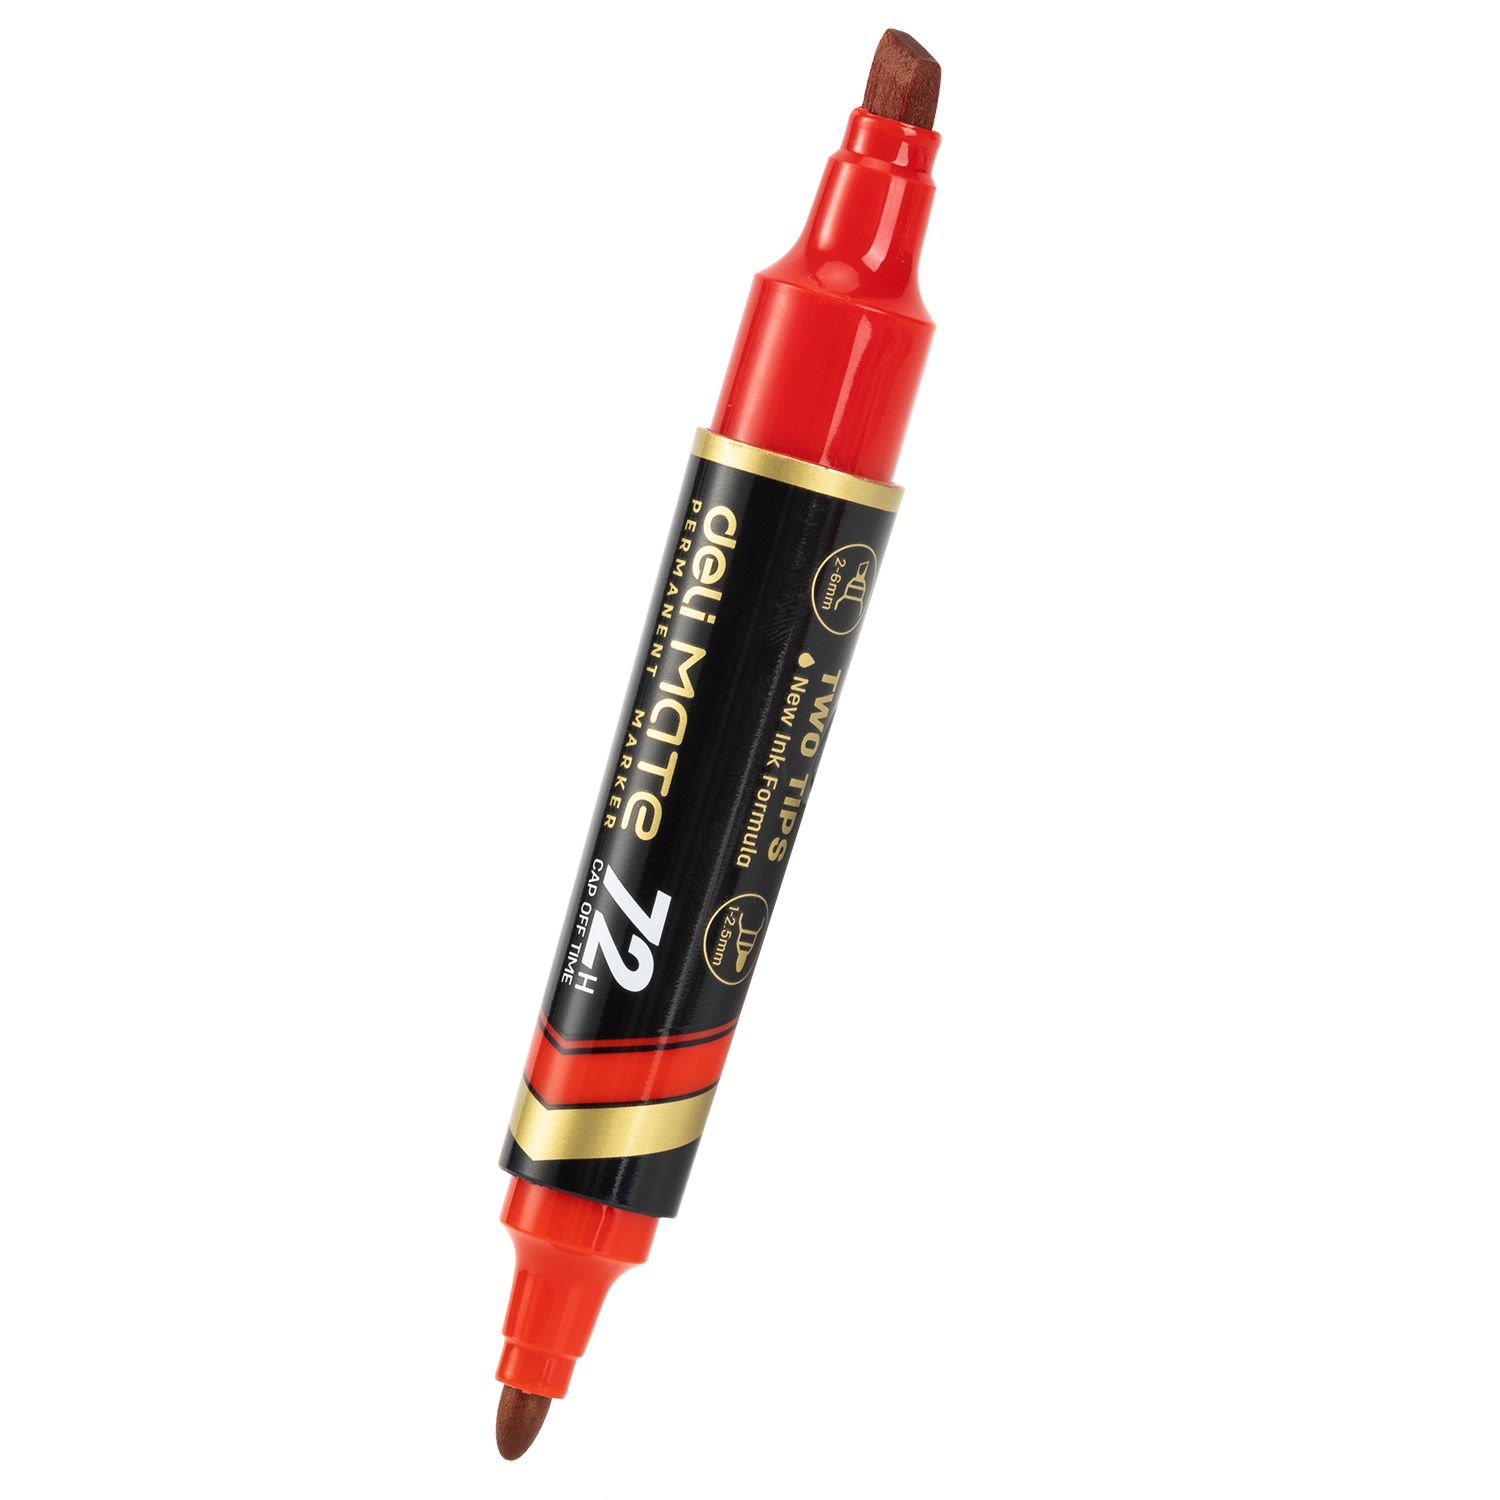 Permanent Marker with two tips Deli - Red · Stationery